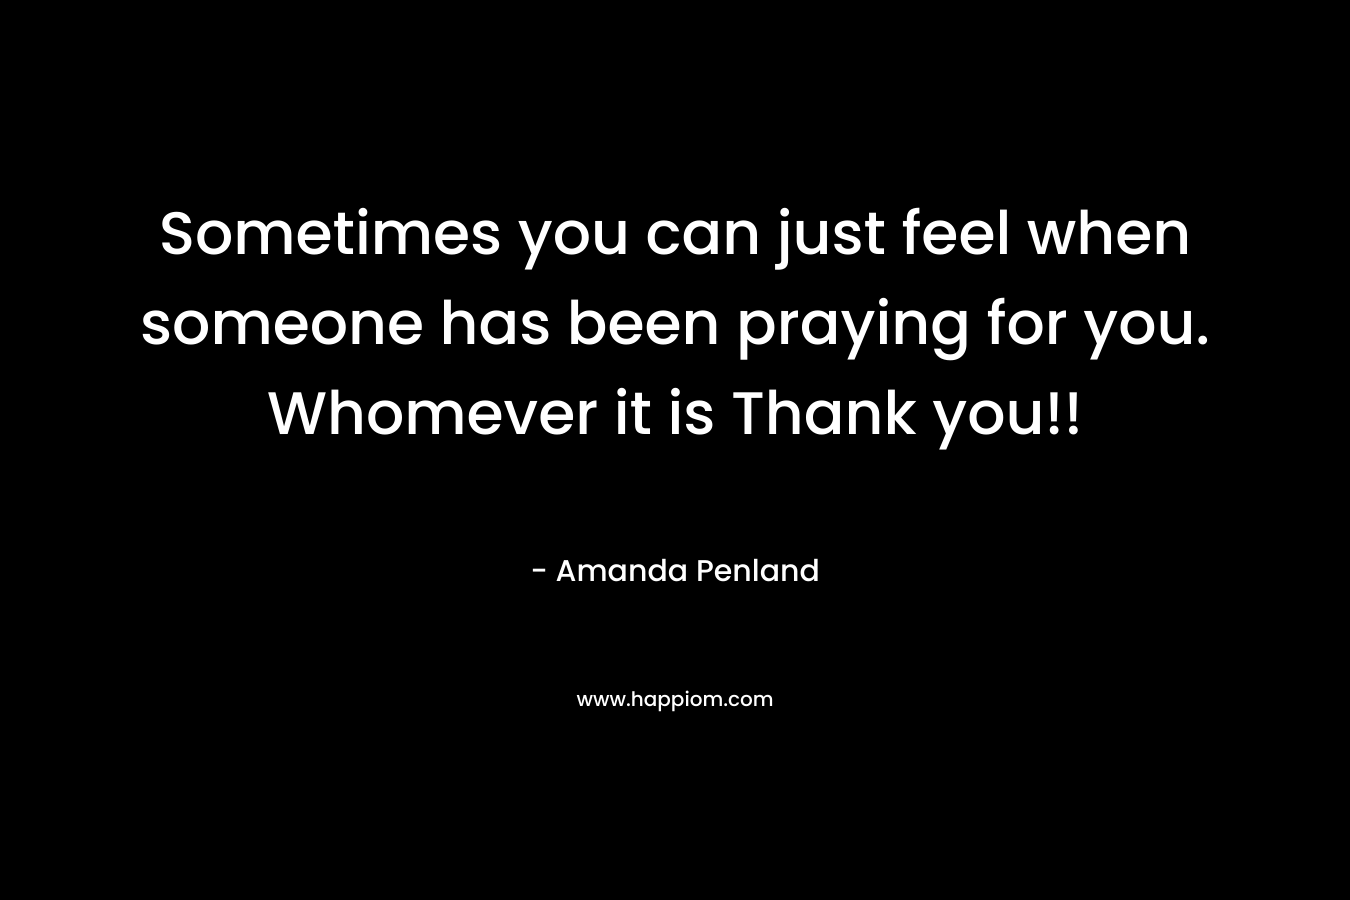 Sometimes you can just feel when someone has been praying for you. Whomever it is Thank you!! – Amanda Penland